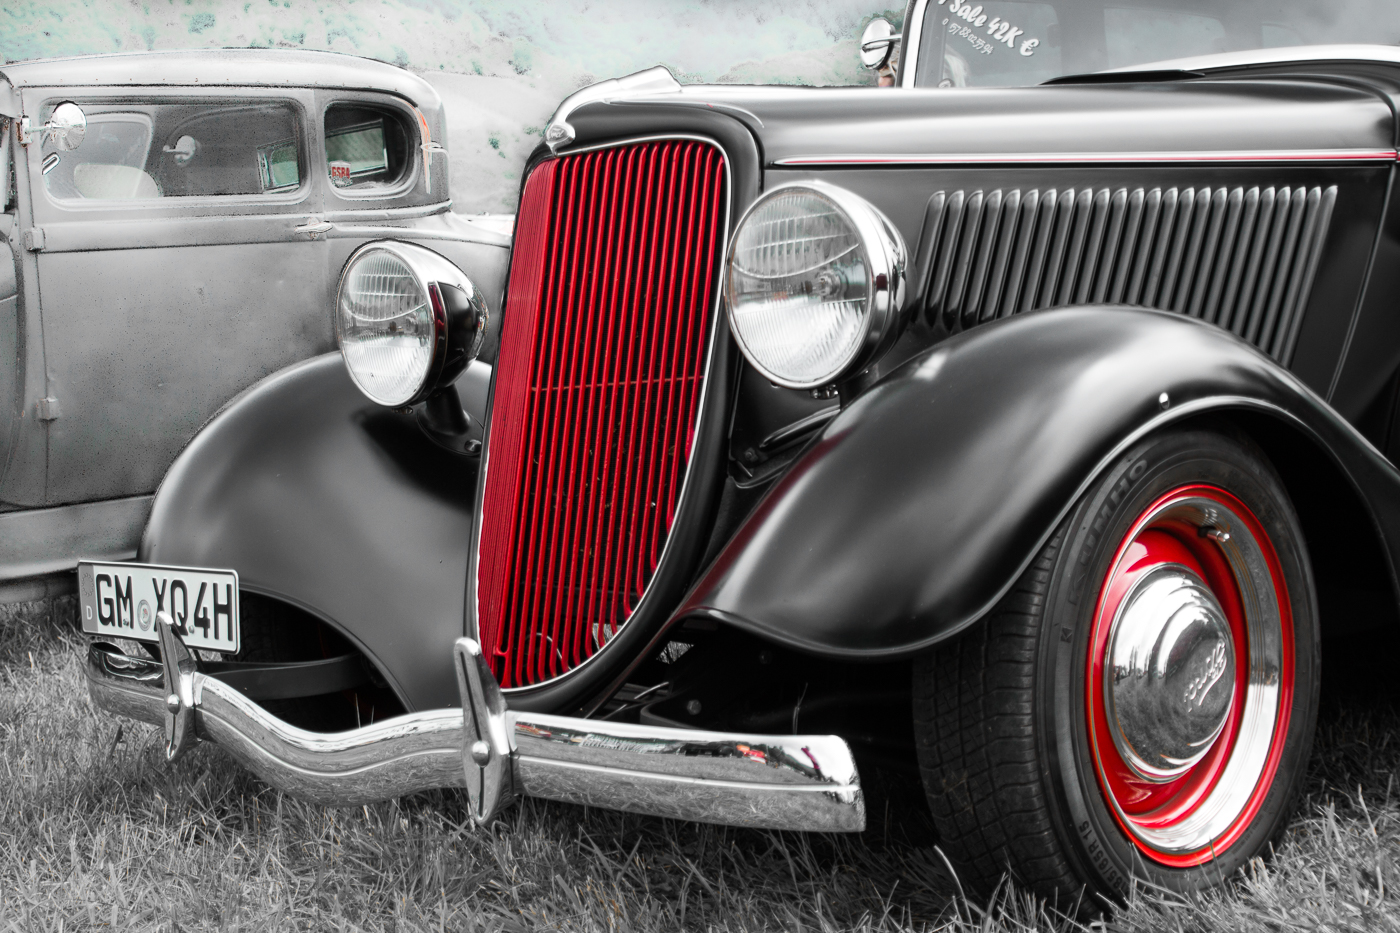 Traditional hot rods